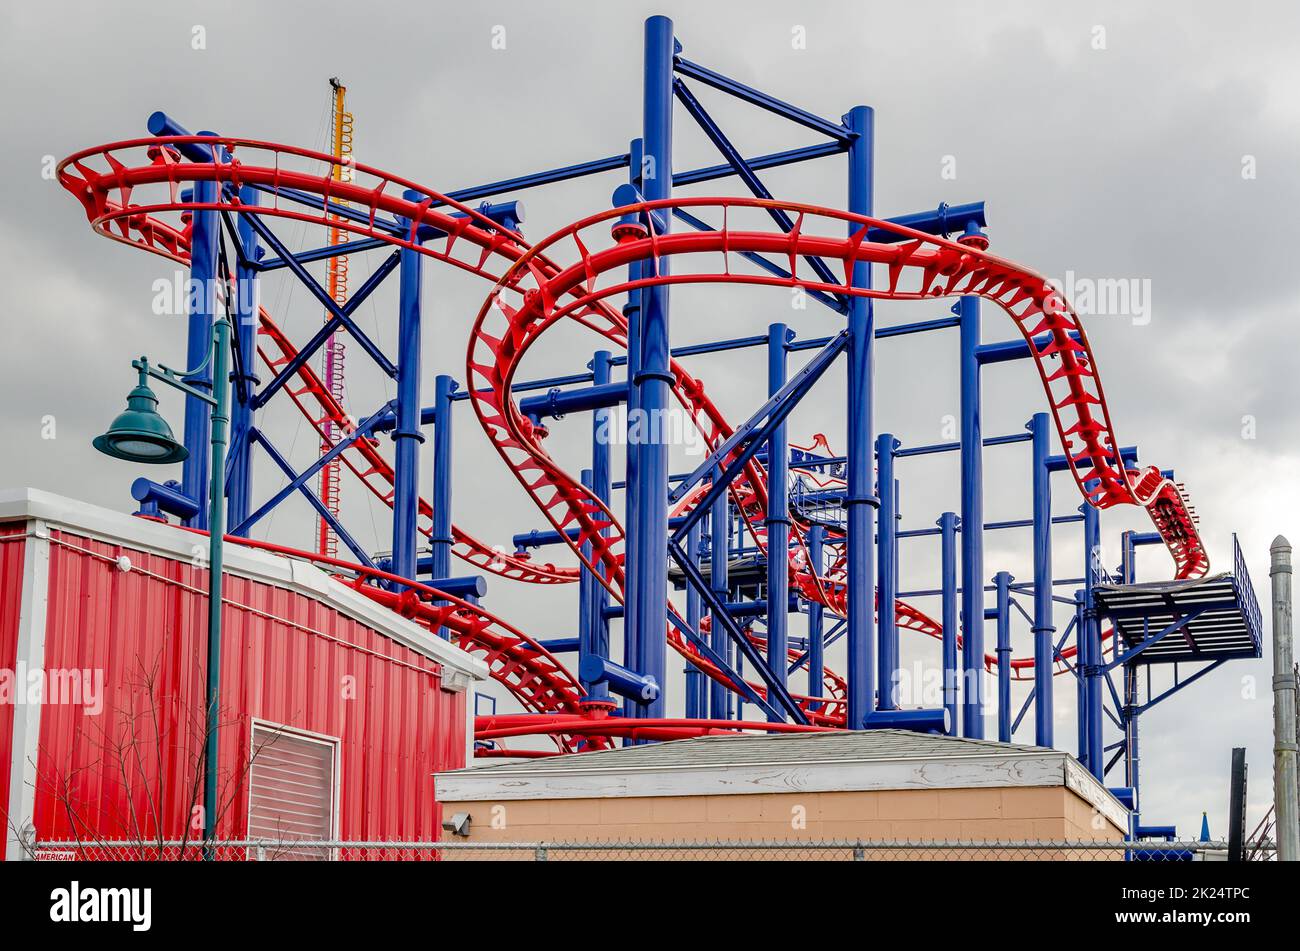 Soarin' Eagle Rollercoaster at Coney island, Brooklyn, New York City during winter day with cloudy sky, view from low angle, buildings in front, horiz Stock Photo